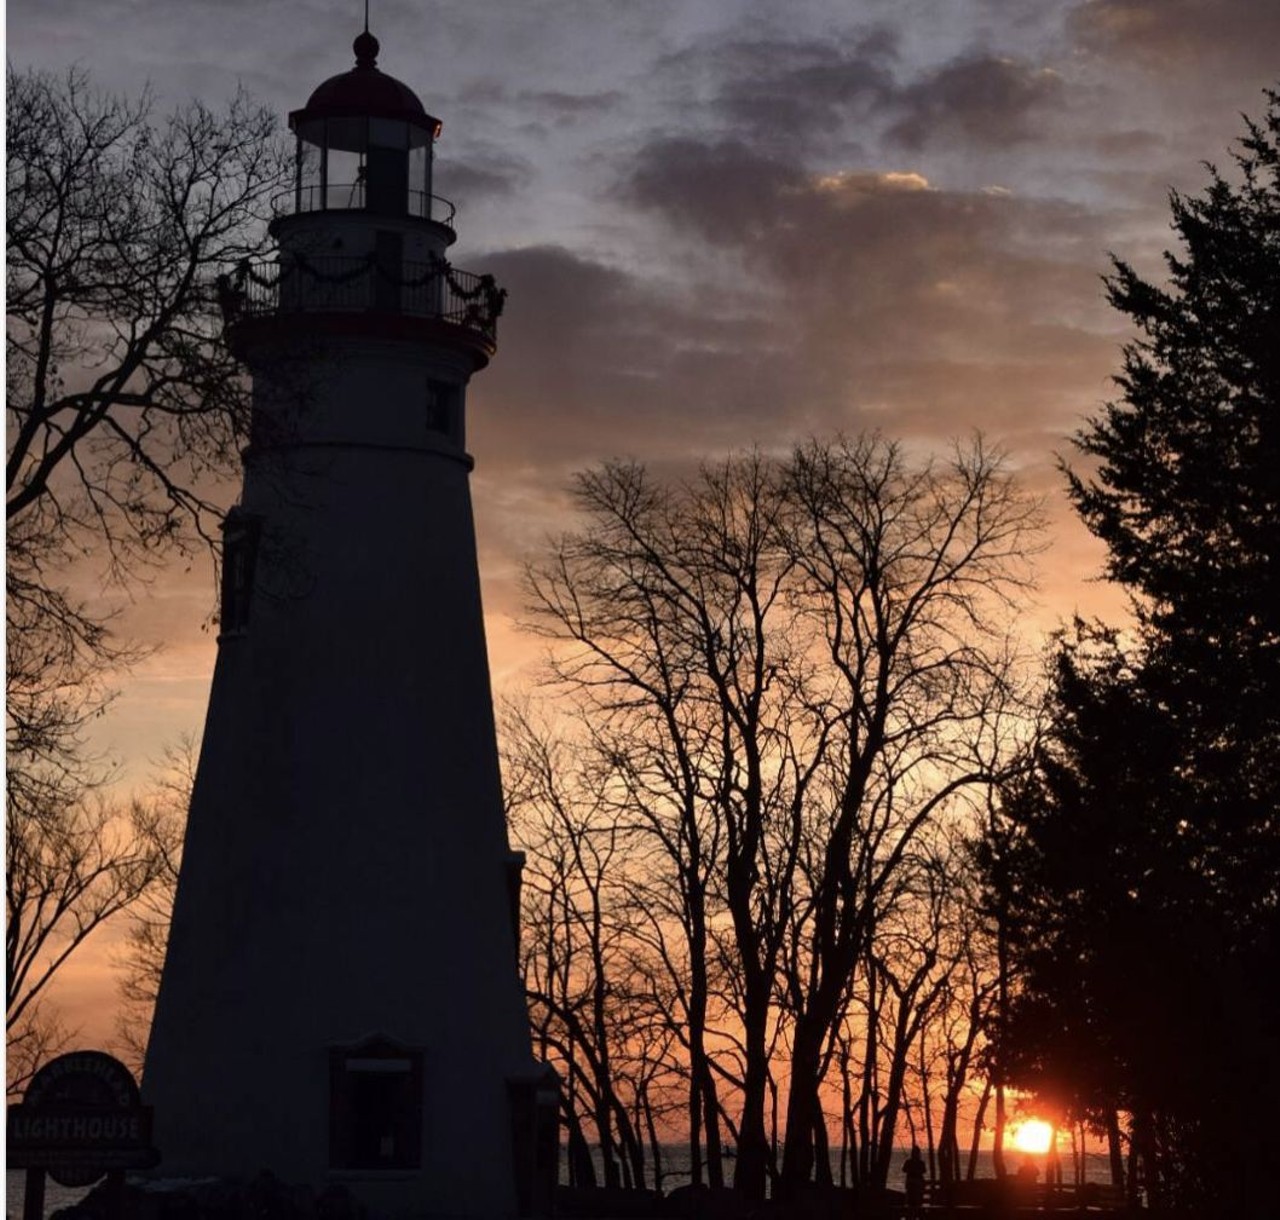 Marblehead
Marblehead boasts one of the best scenic lighthouses in Ohio, perfect for taking in a fall sunset. Check out the Lakeside-Marblehead Lighthouse Festival this October.
Photo via @_Doctor_VV_/Instagram